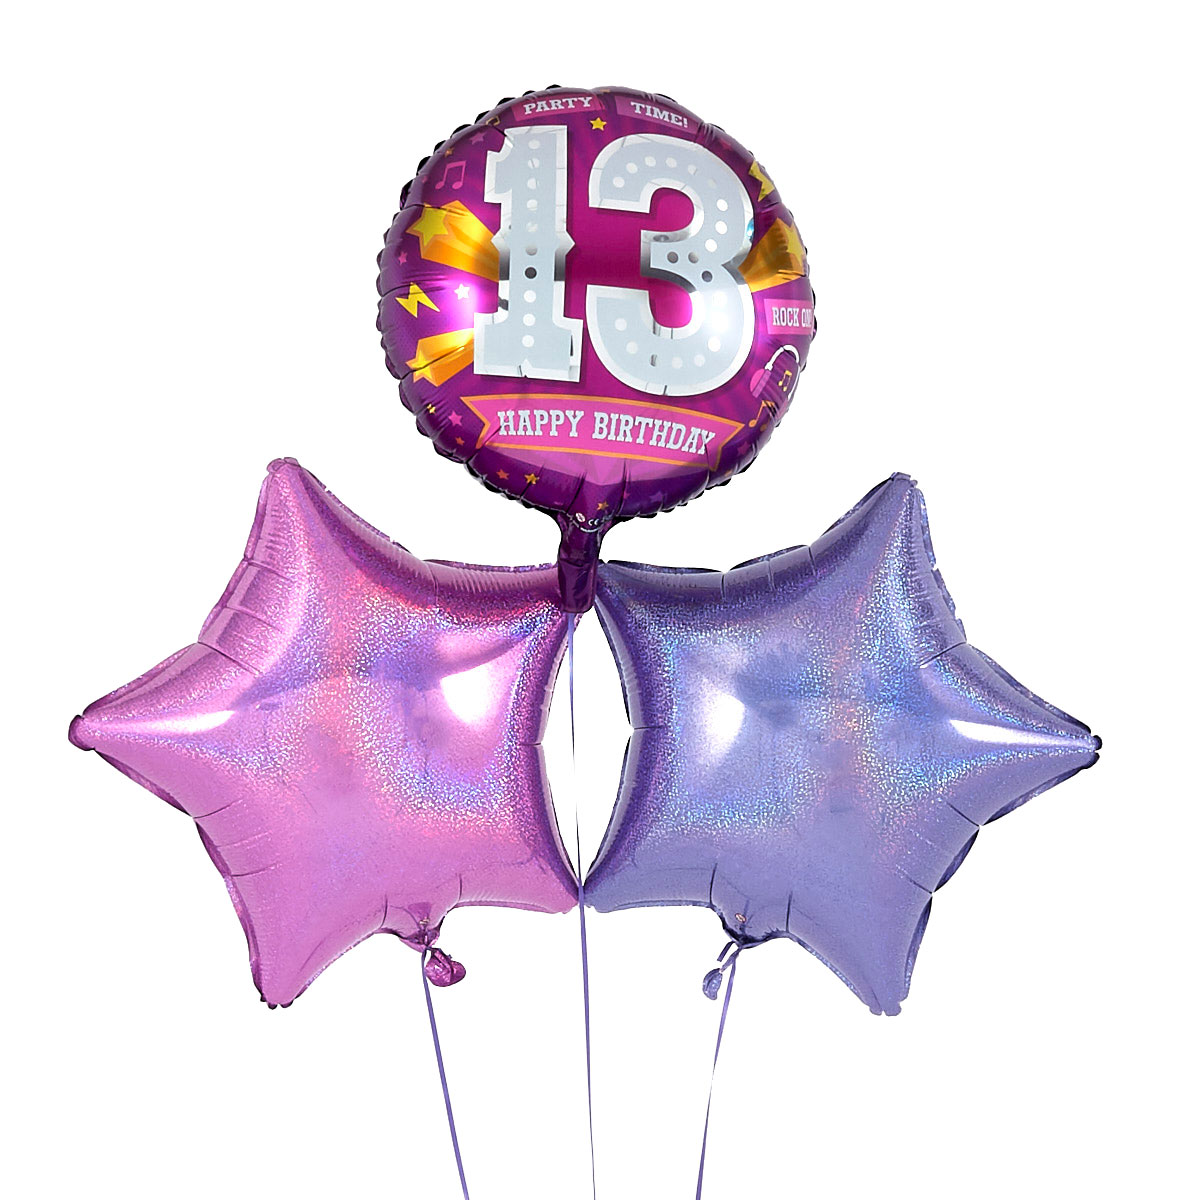 13th Birthday Pink Balloon Bouquet - DELIVERED INFLATED! 